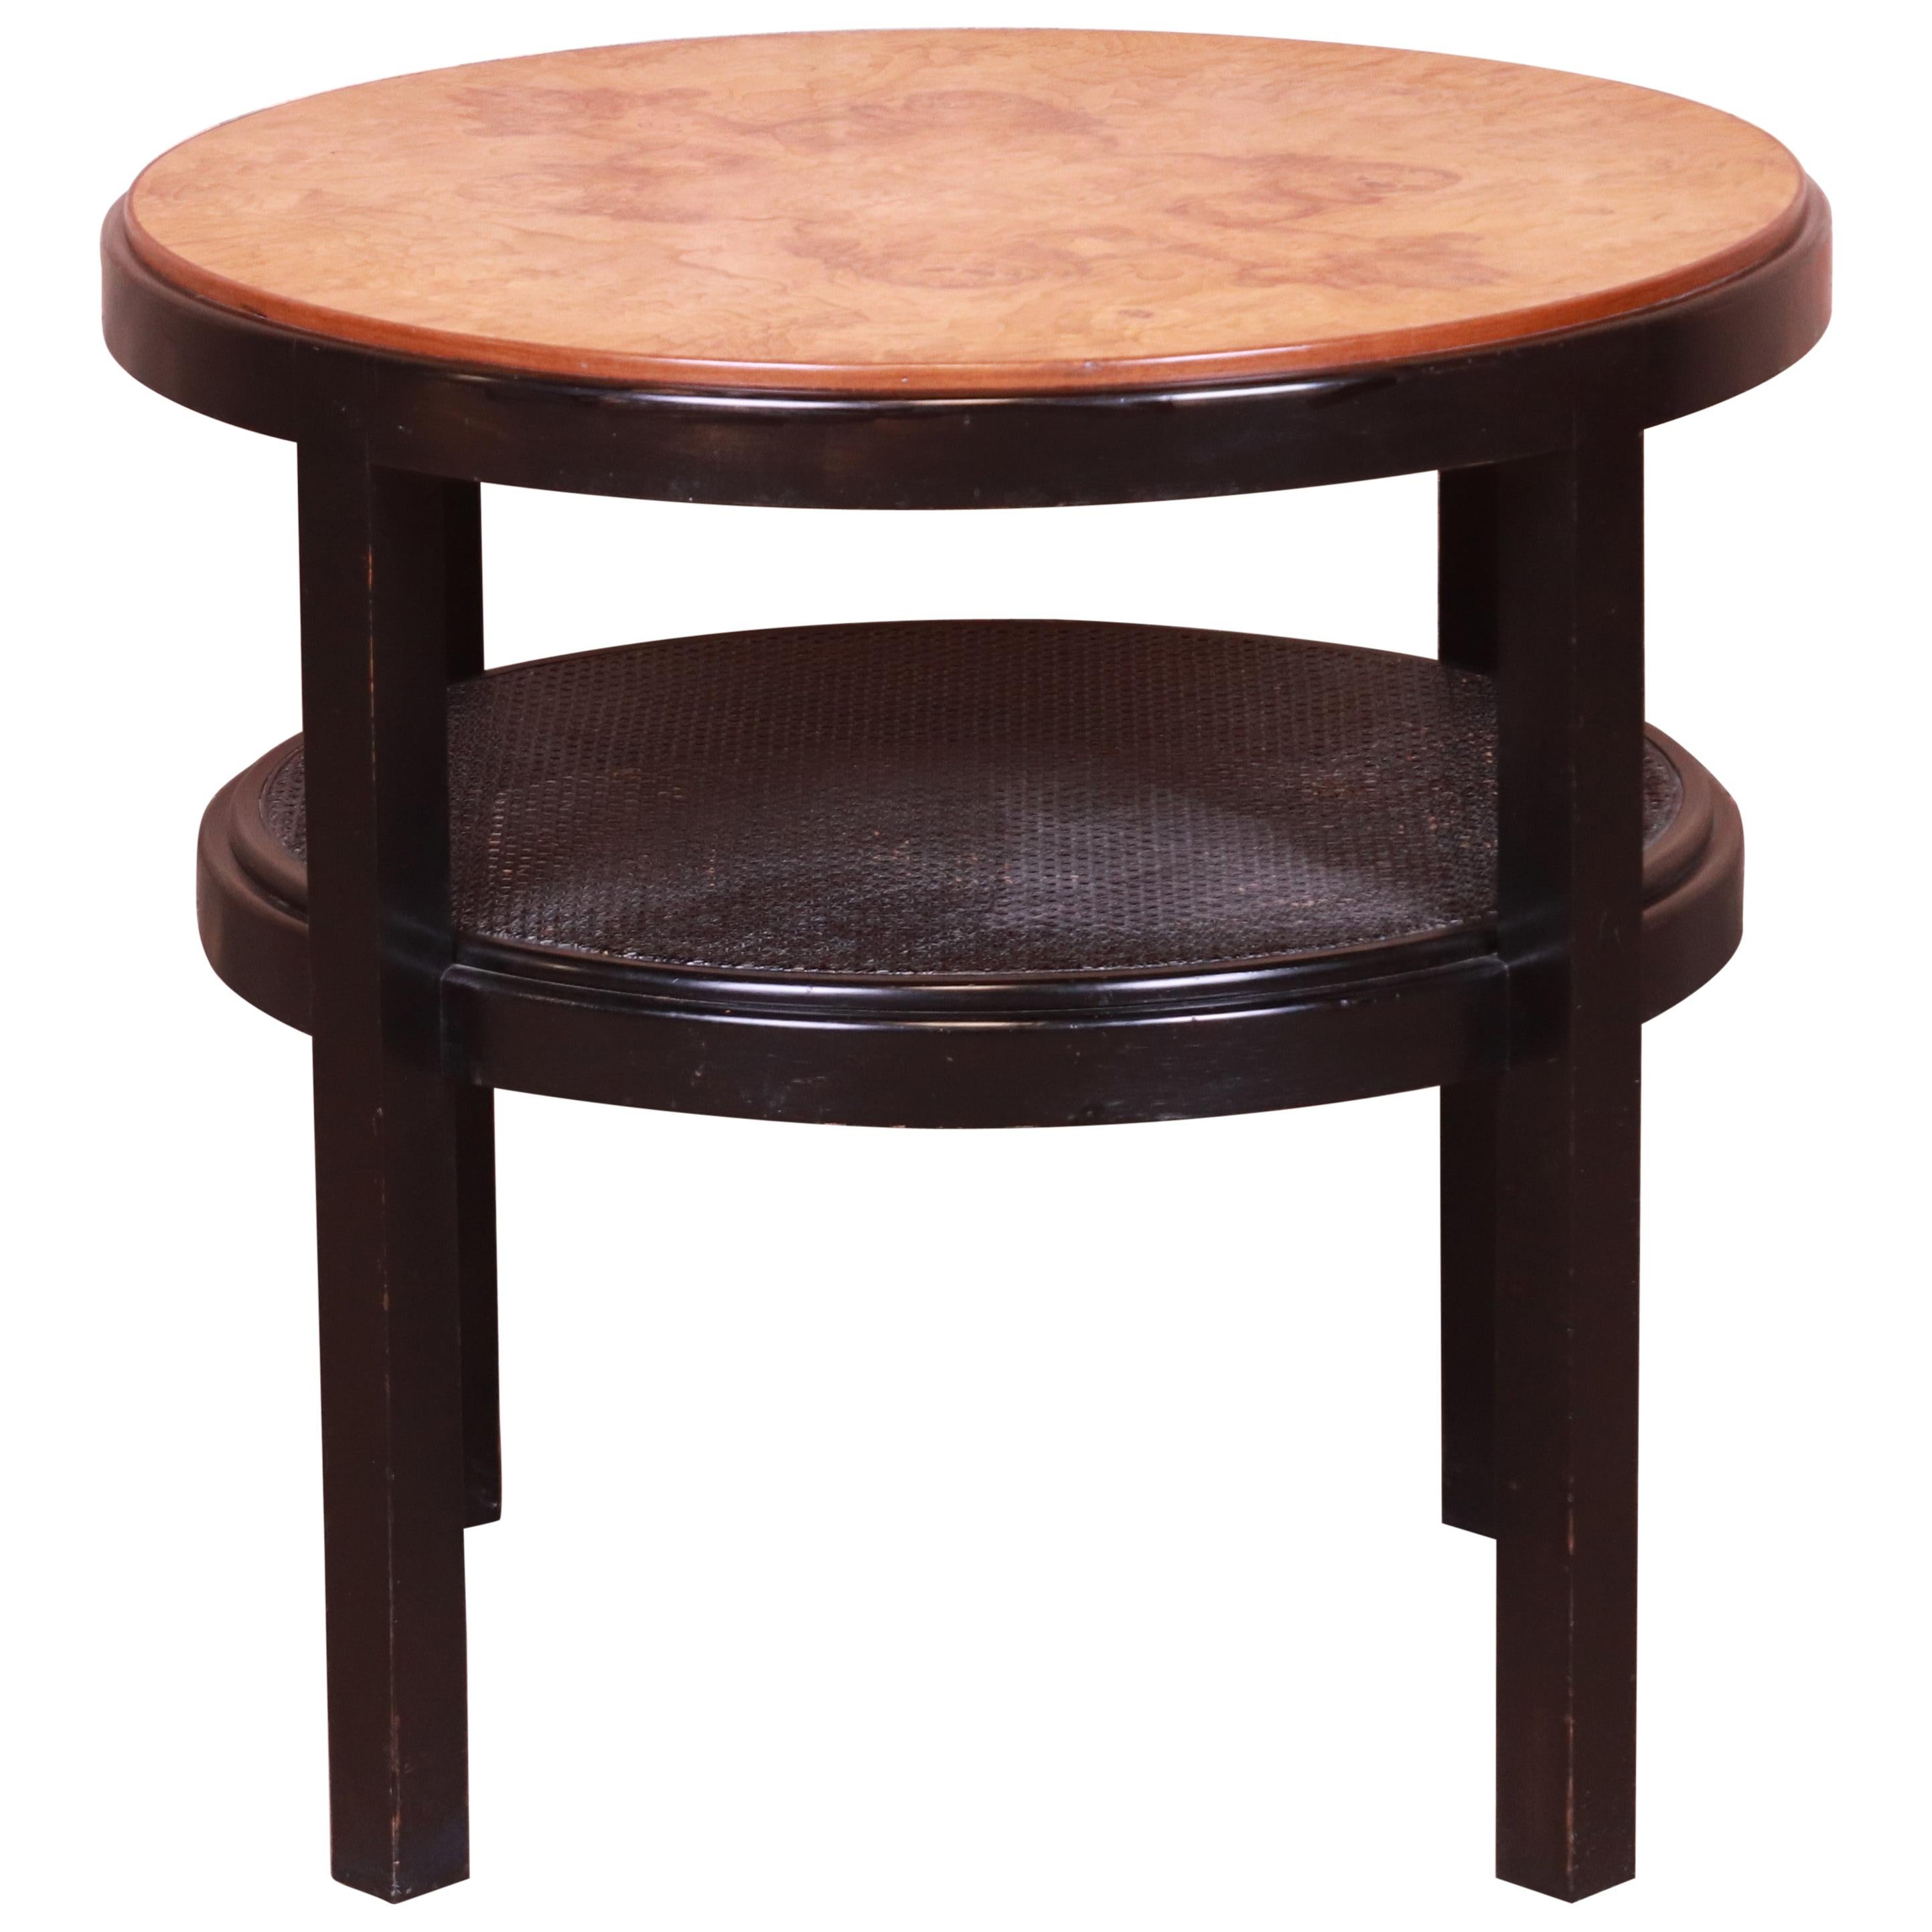 Edward Wormley for Dunbar Burl Wood and Cane Occasional Side Table, circa 1960s